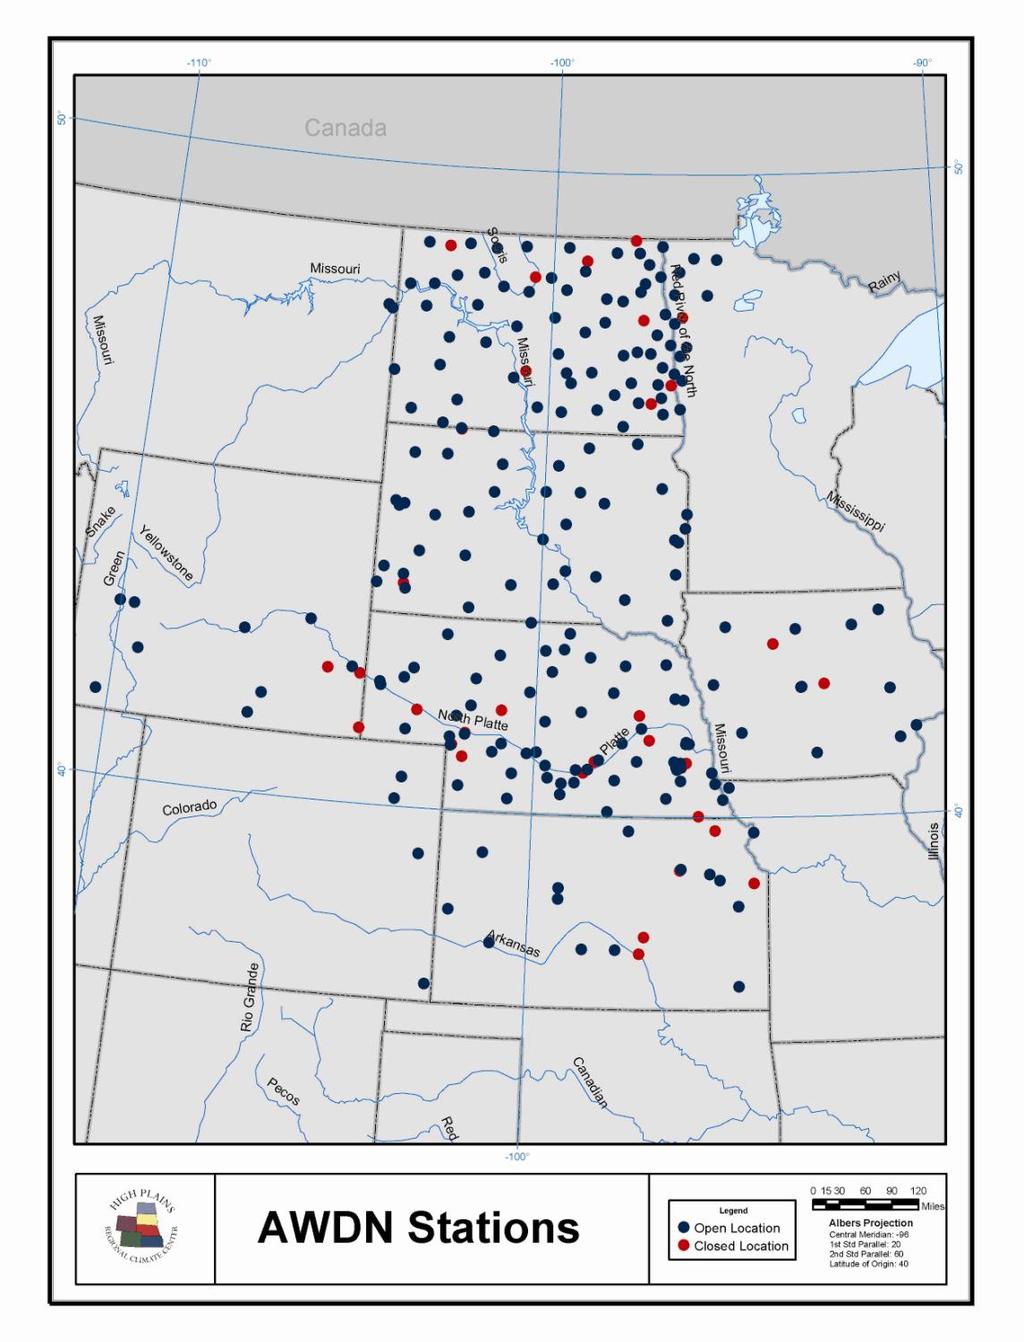 2. Basin Conditions NOAA High Plains Regional Climate